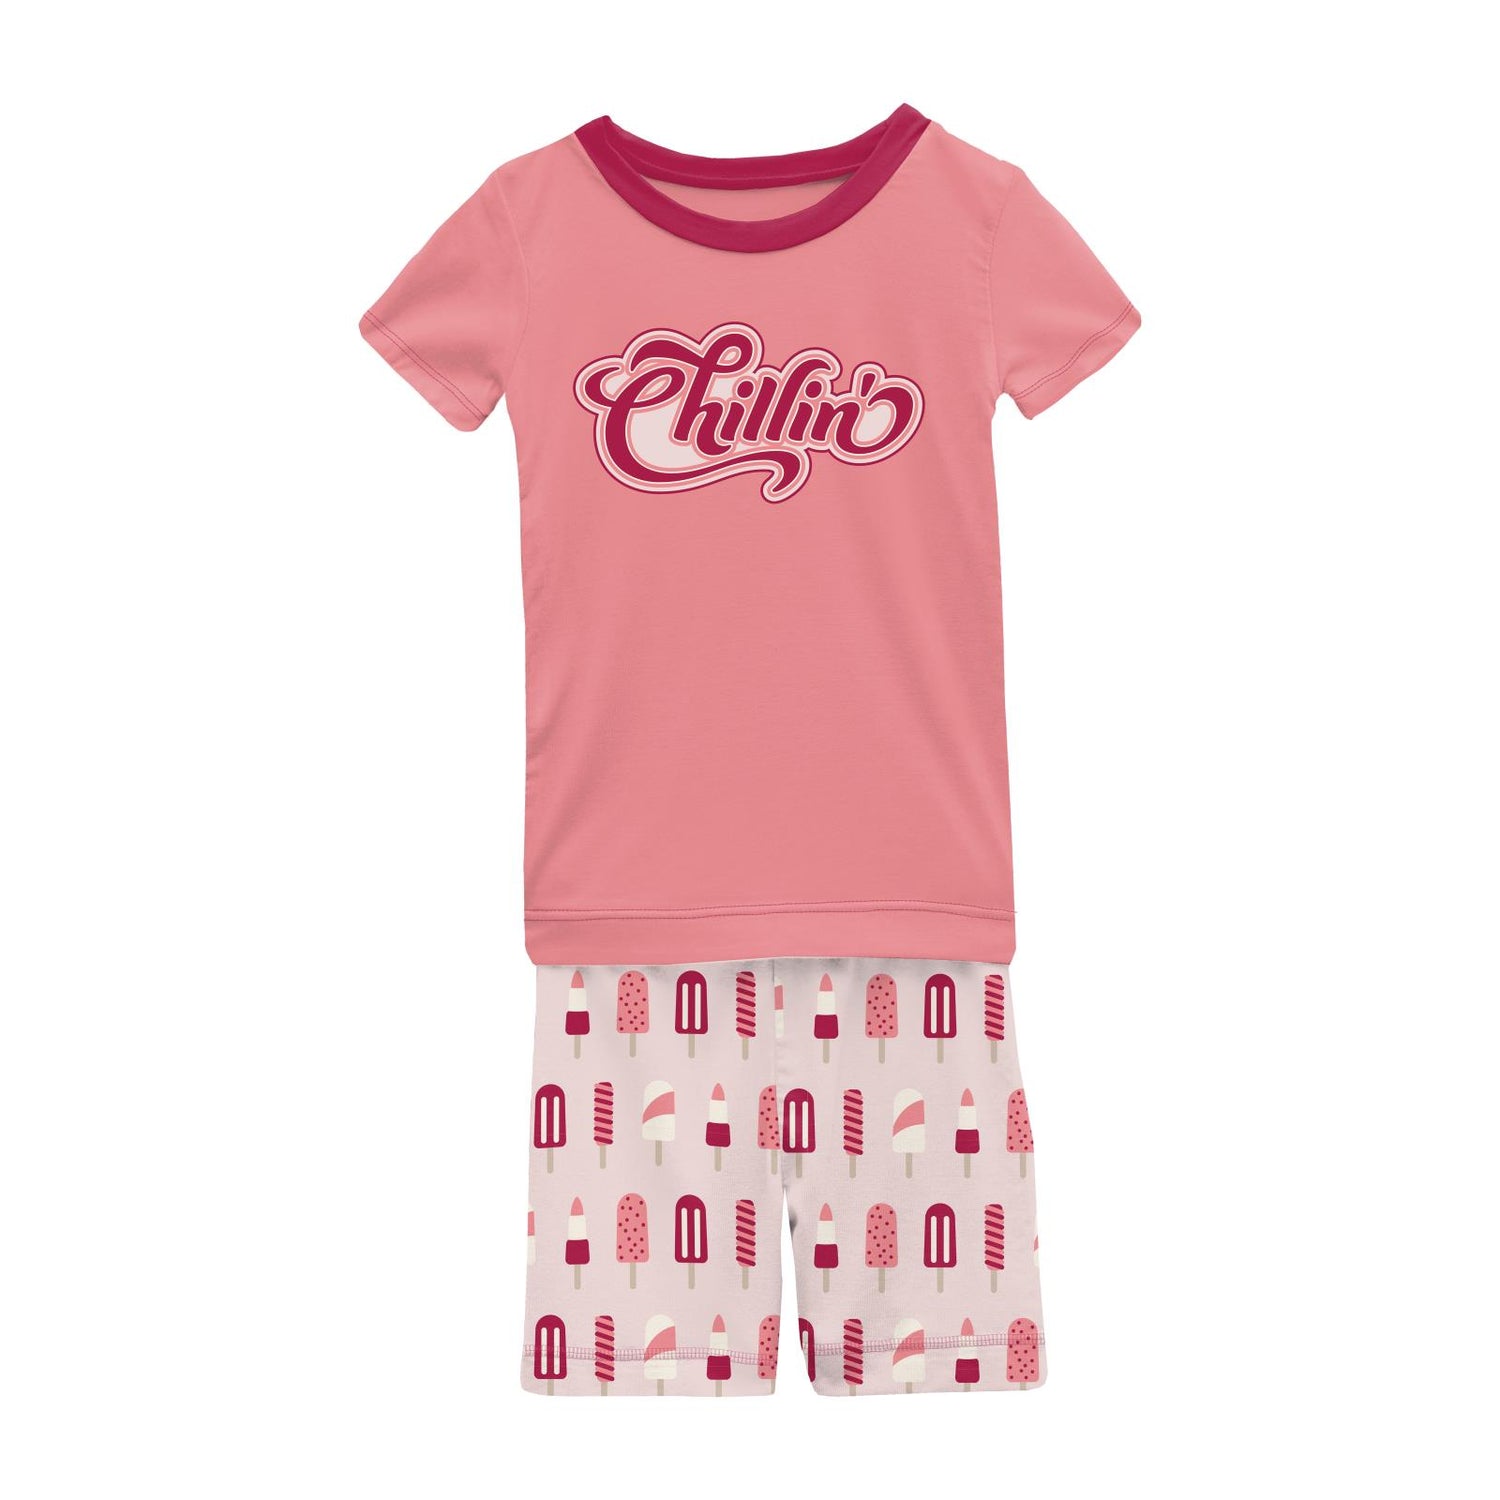 Short Sleeve Graphic Tee Pajama Set with Shorts in Macaroon Popsicles